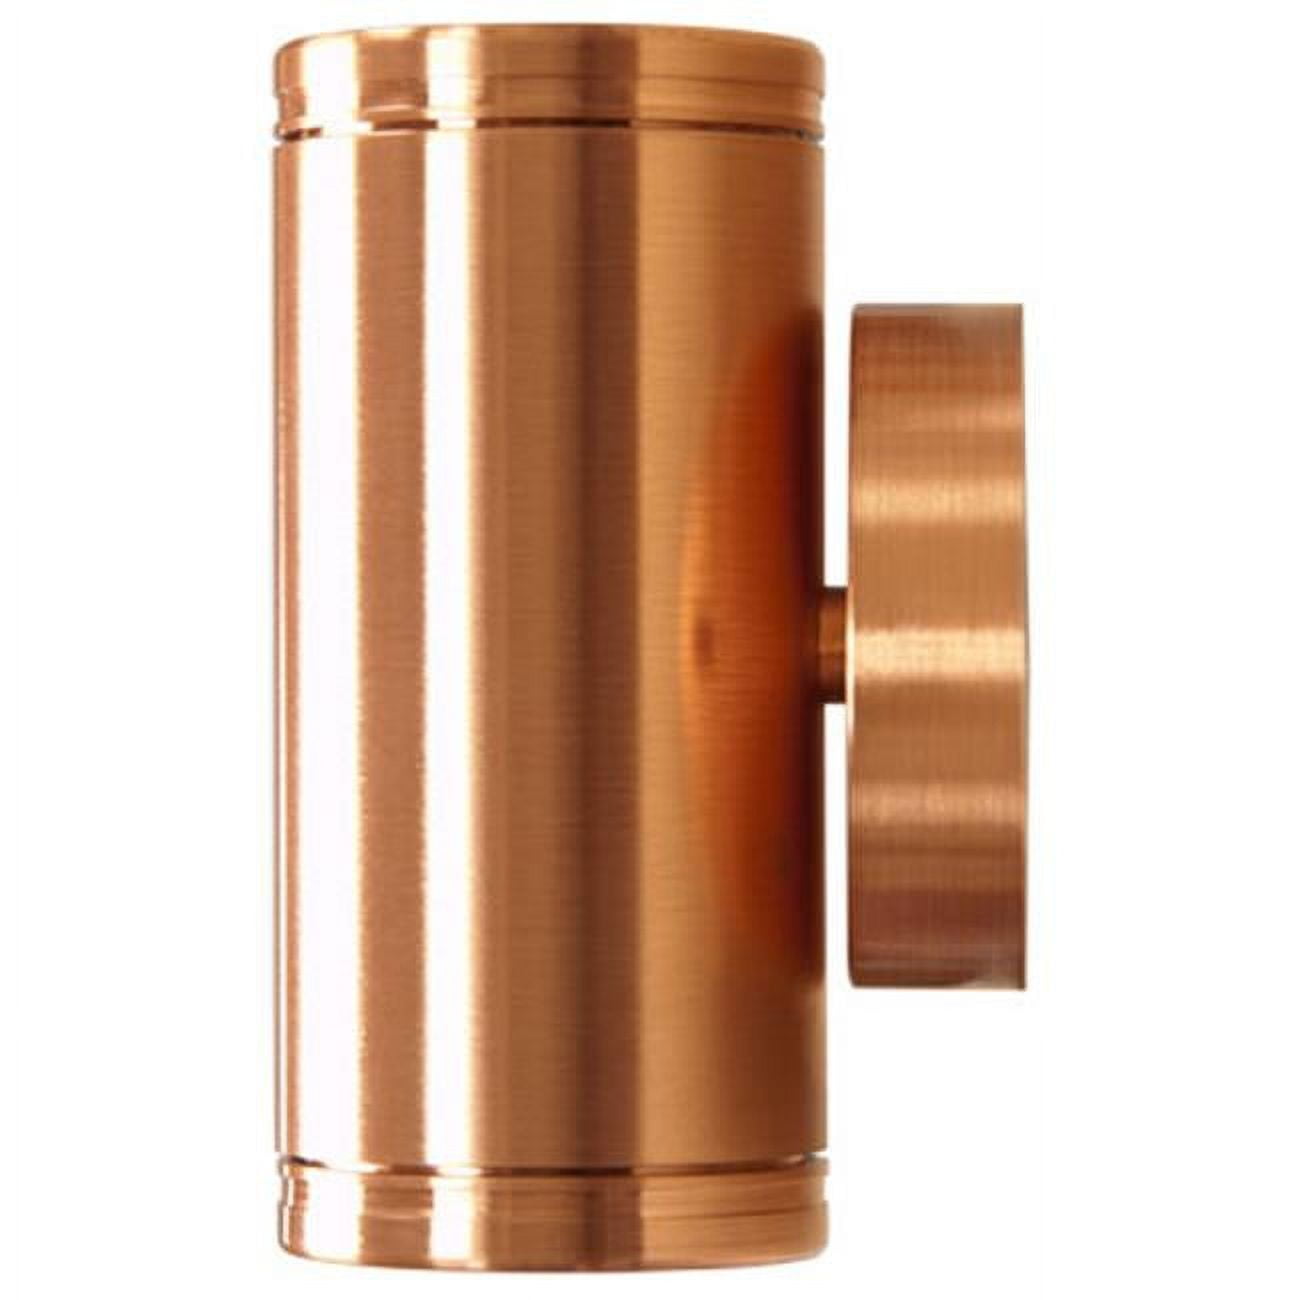 Picture of Dabmar Lighting LV65-CP Copper Surface Mount Up-Down, Brick, Step, Wall & Deck Light, Copper - 5.38 x 3.01 x 3.34 in.